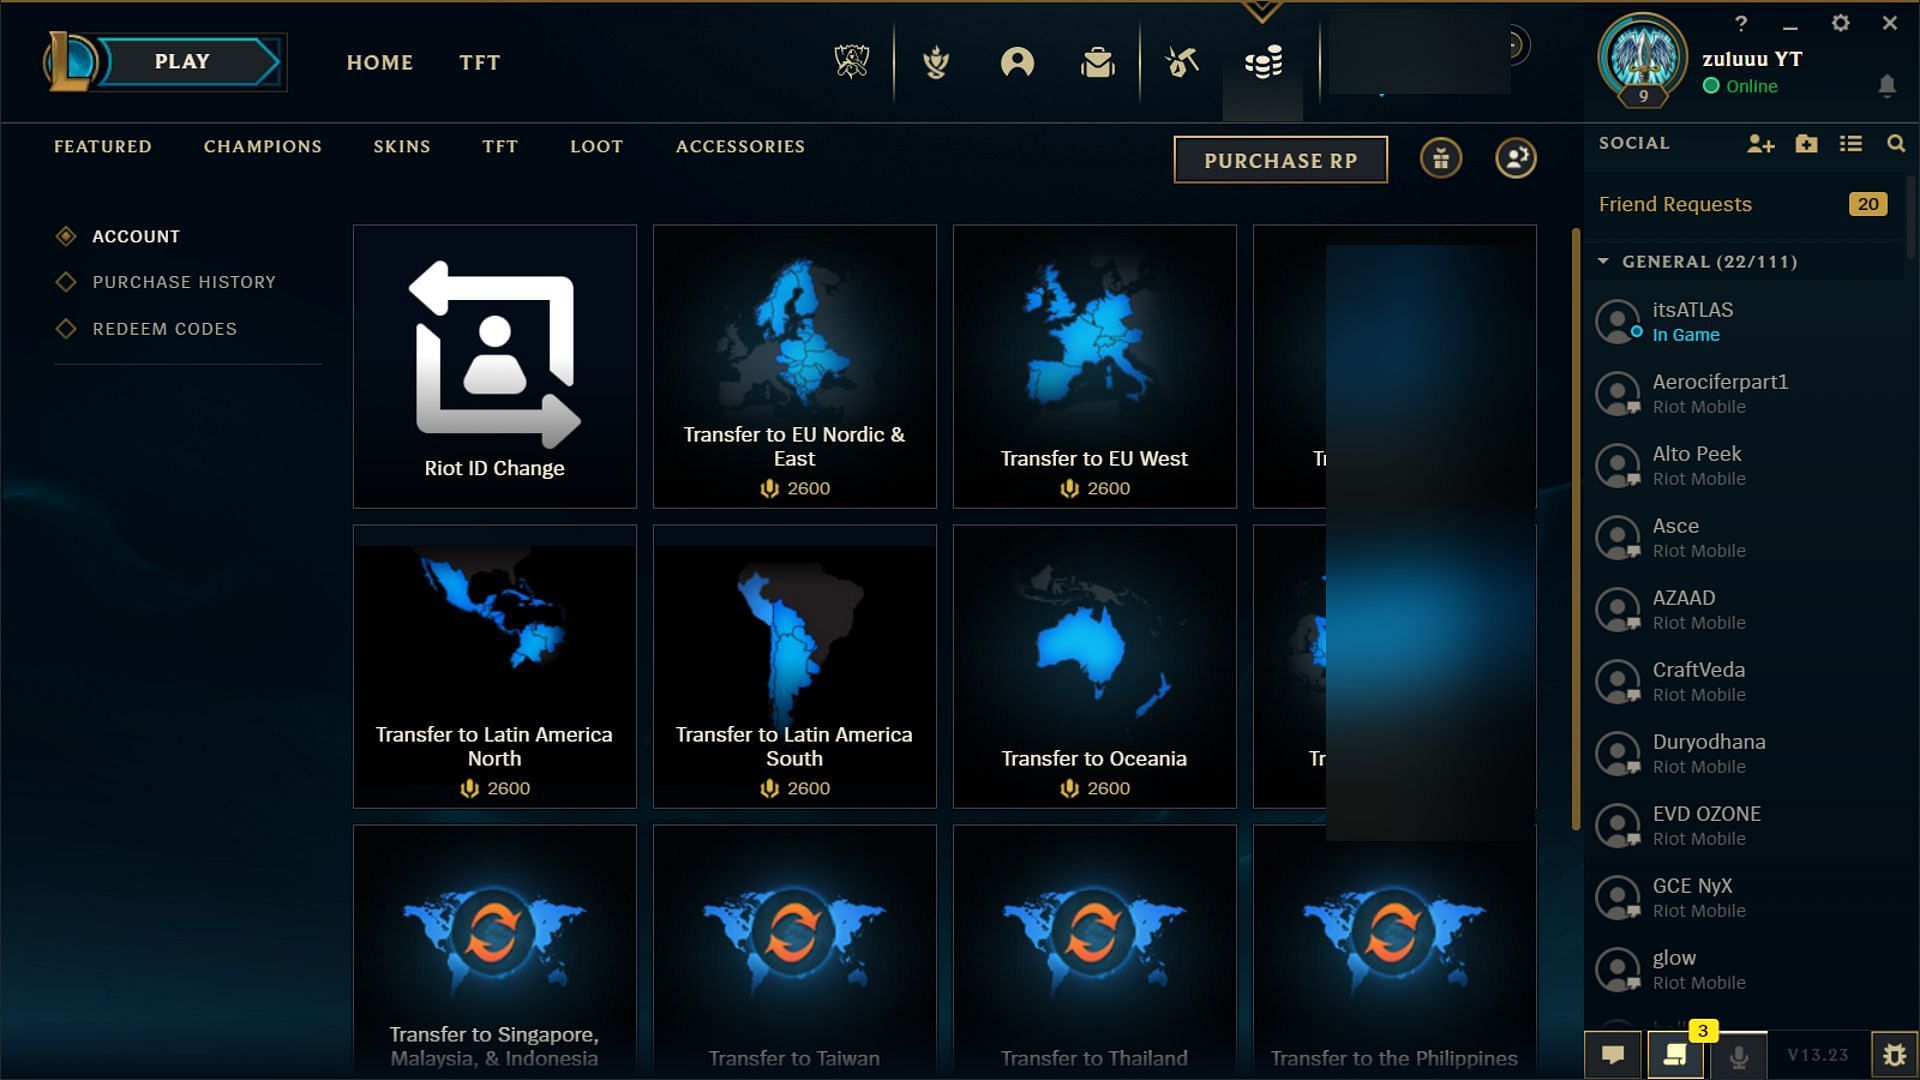 You can change the LoL account&#039;s region with 2600 RP (Image via Riot Games)